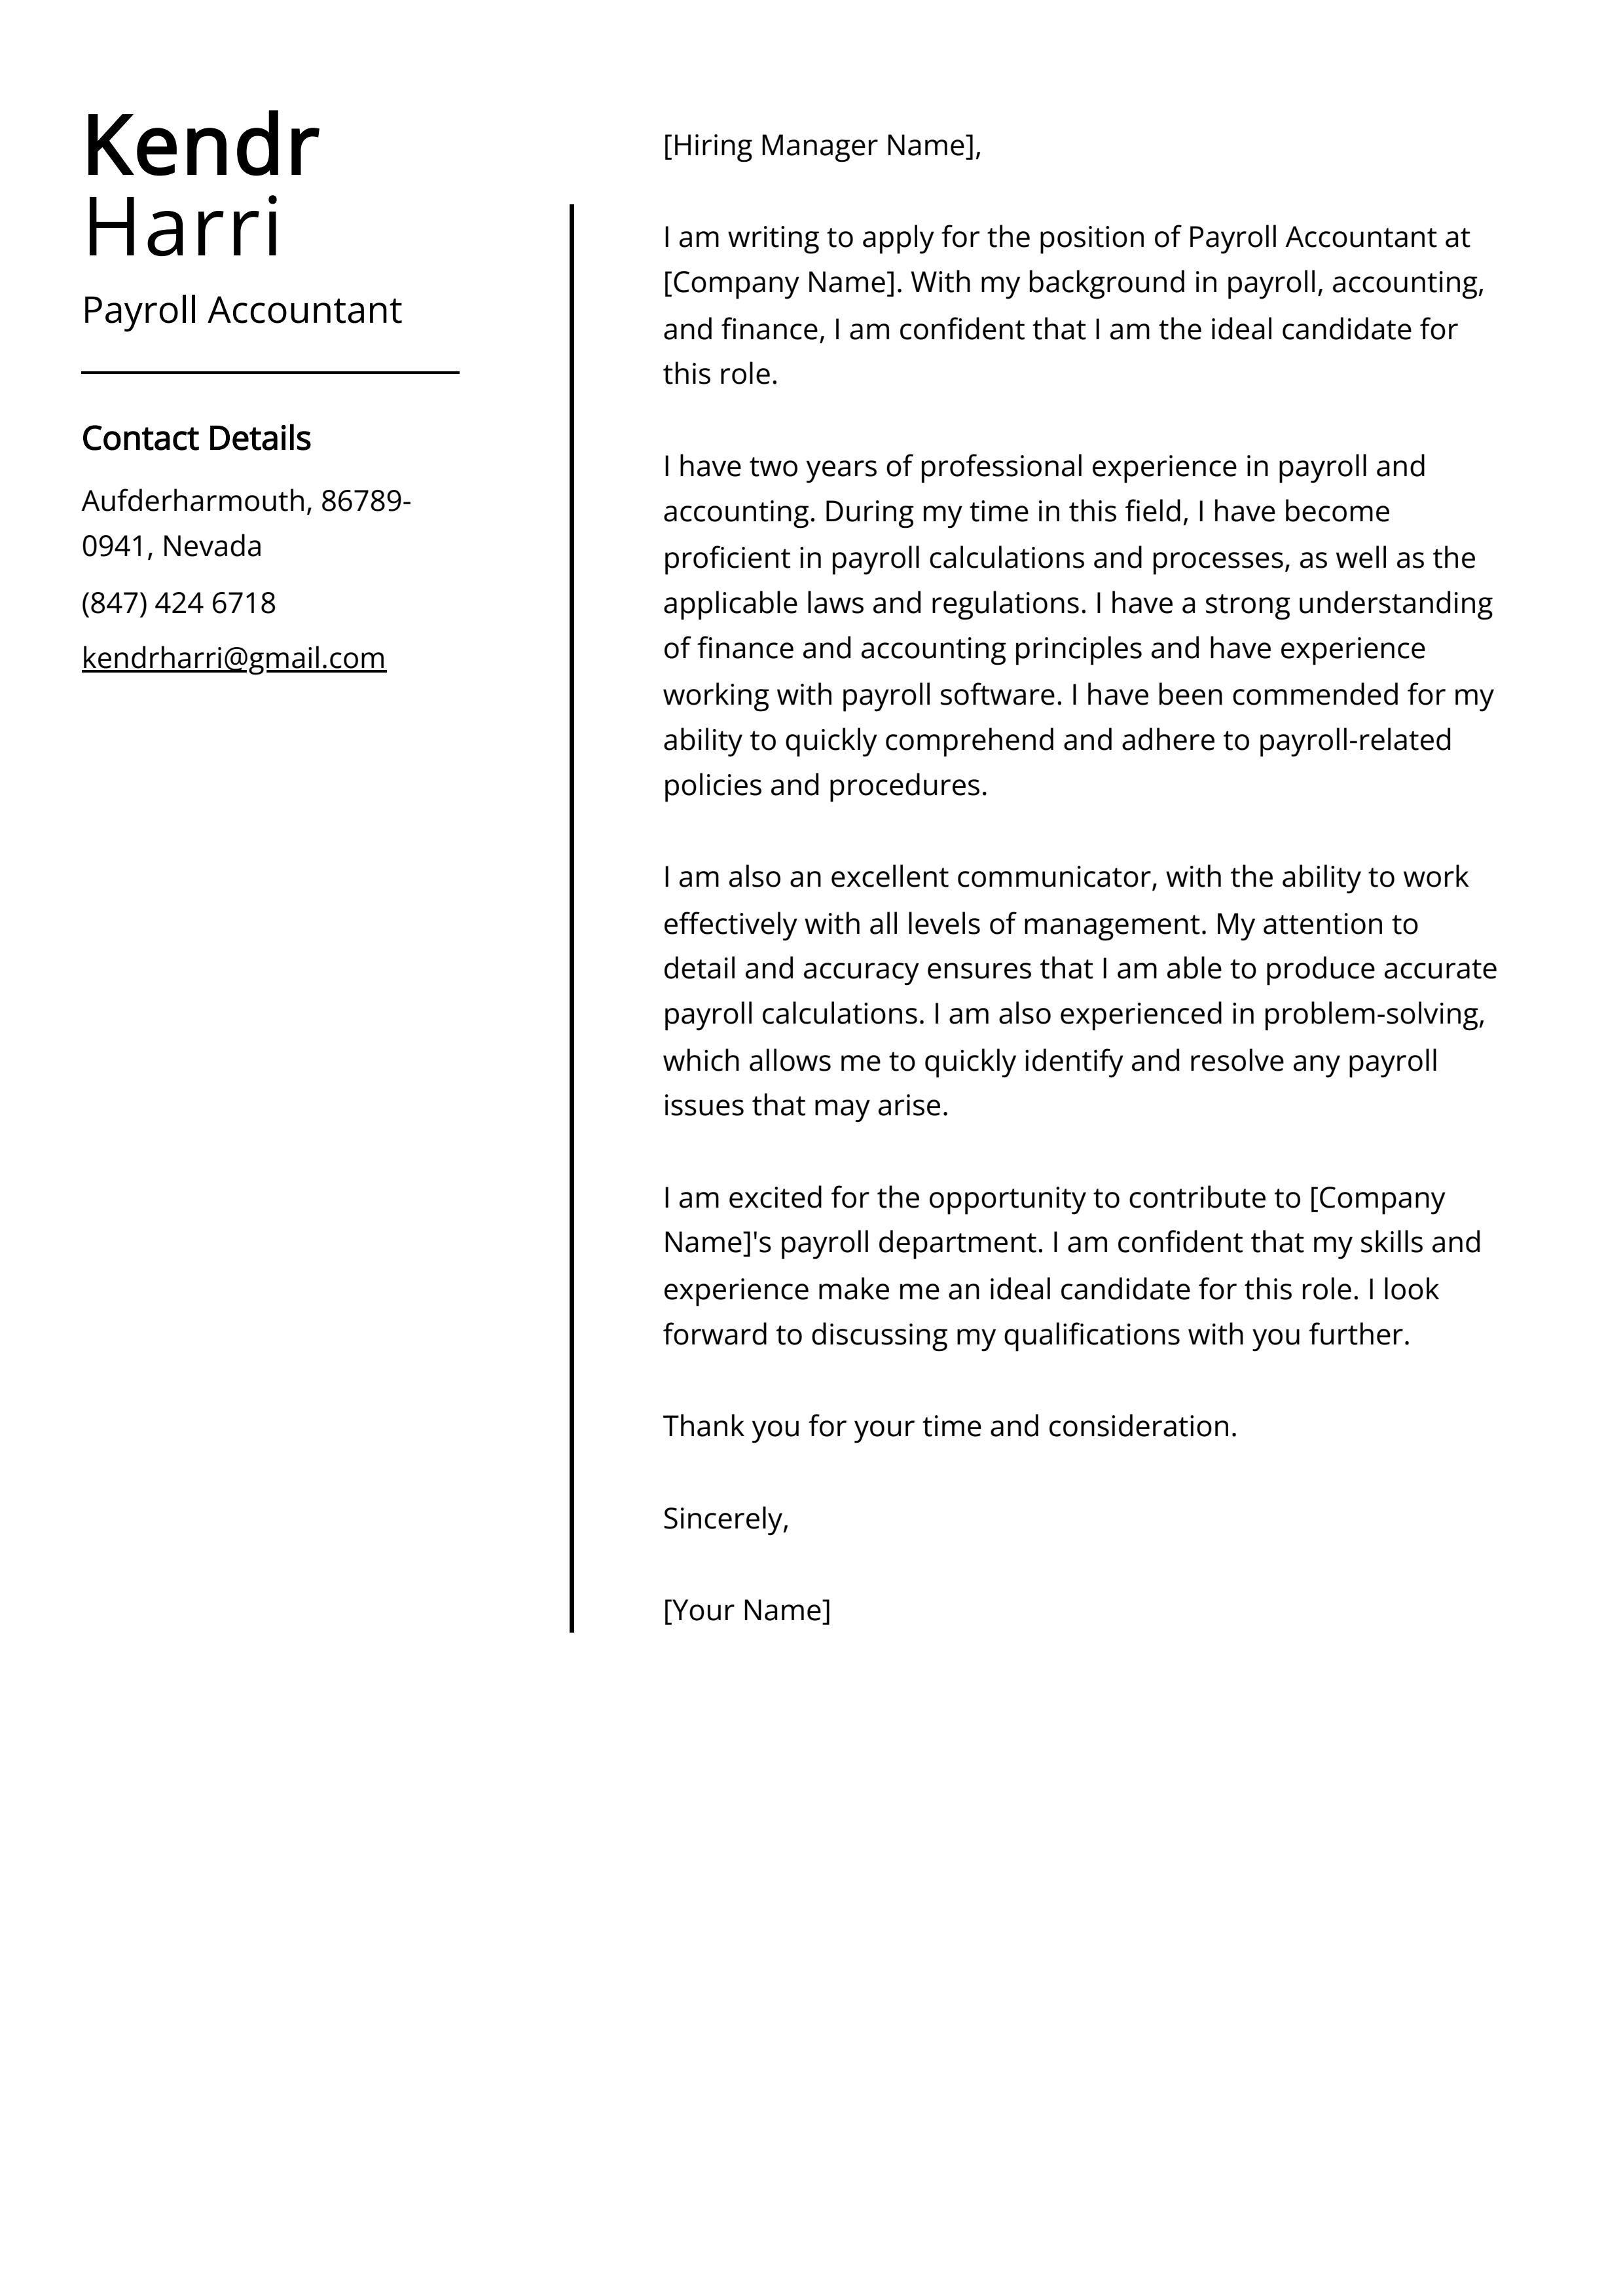 Payroll Accountant Cover Letter Example